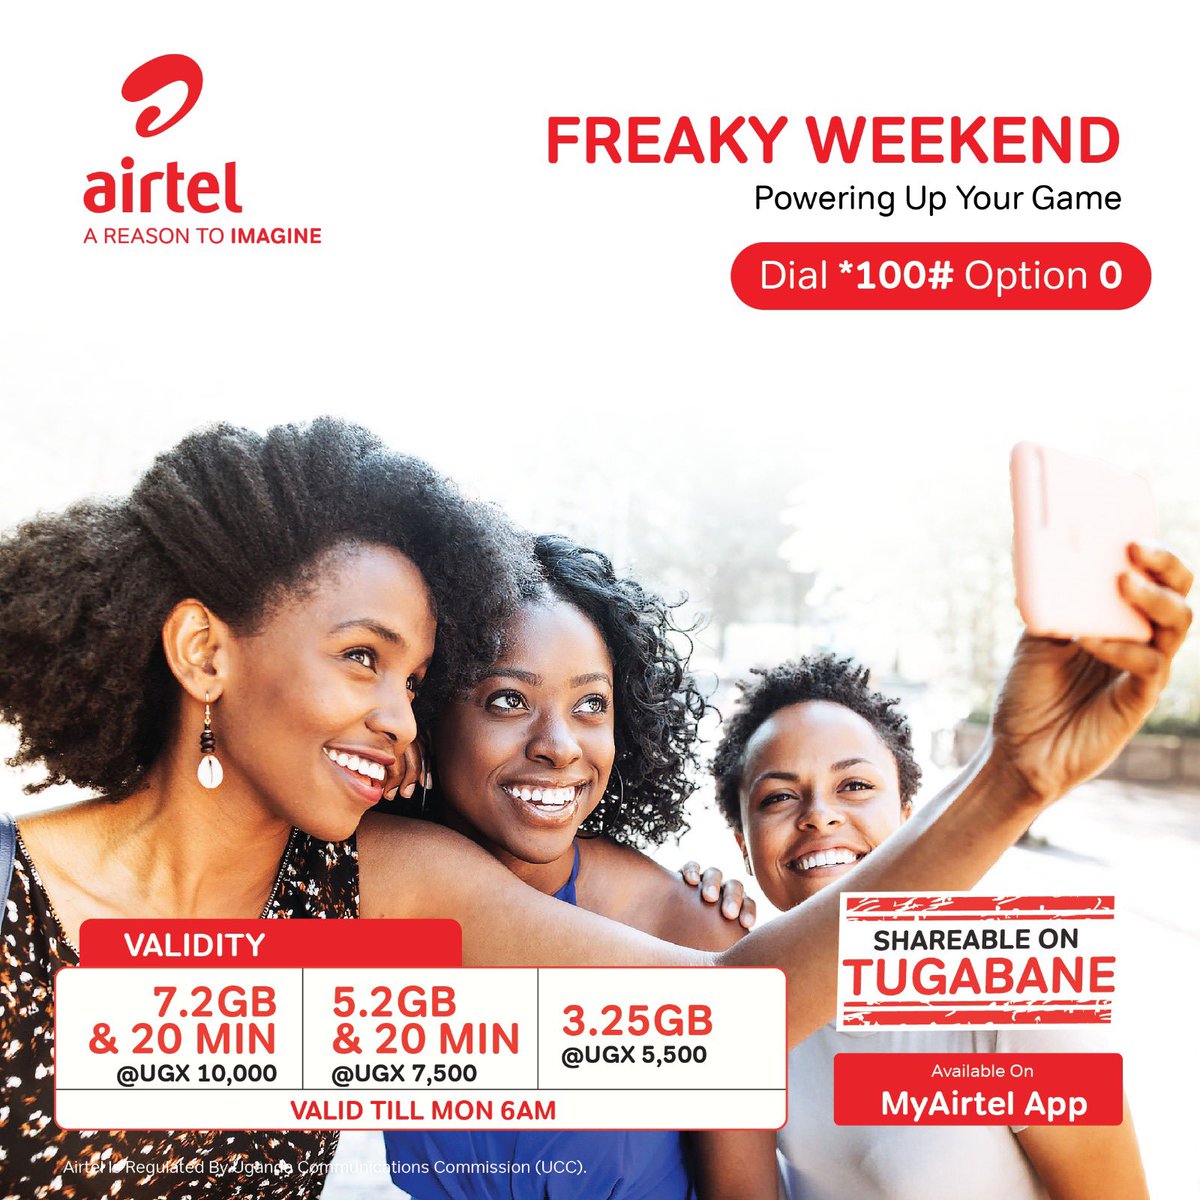 Power your weekend with #FreakyFriday, Dial*100# and select option 0 or use the #MyAirtelApp airtelafrica.onelink.me/cGyr/qgj4qeu2